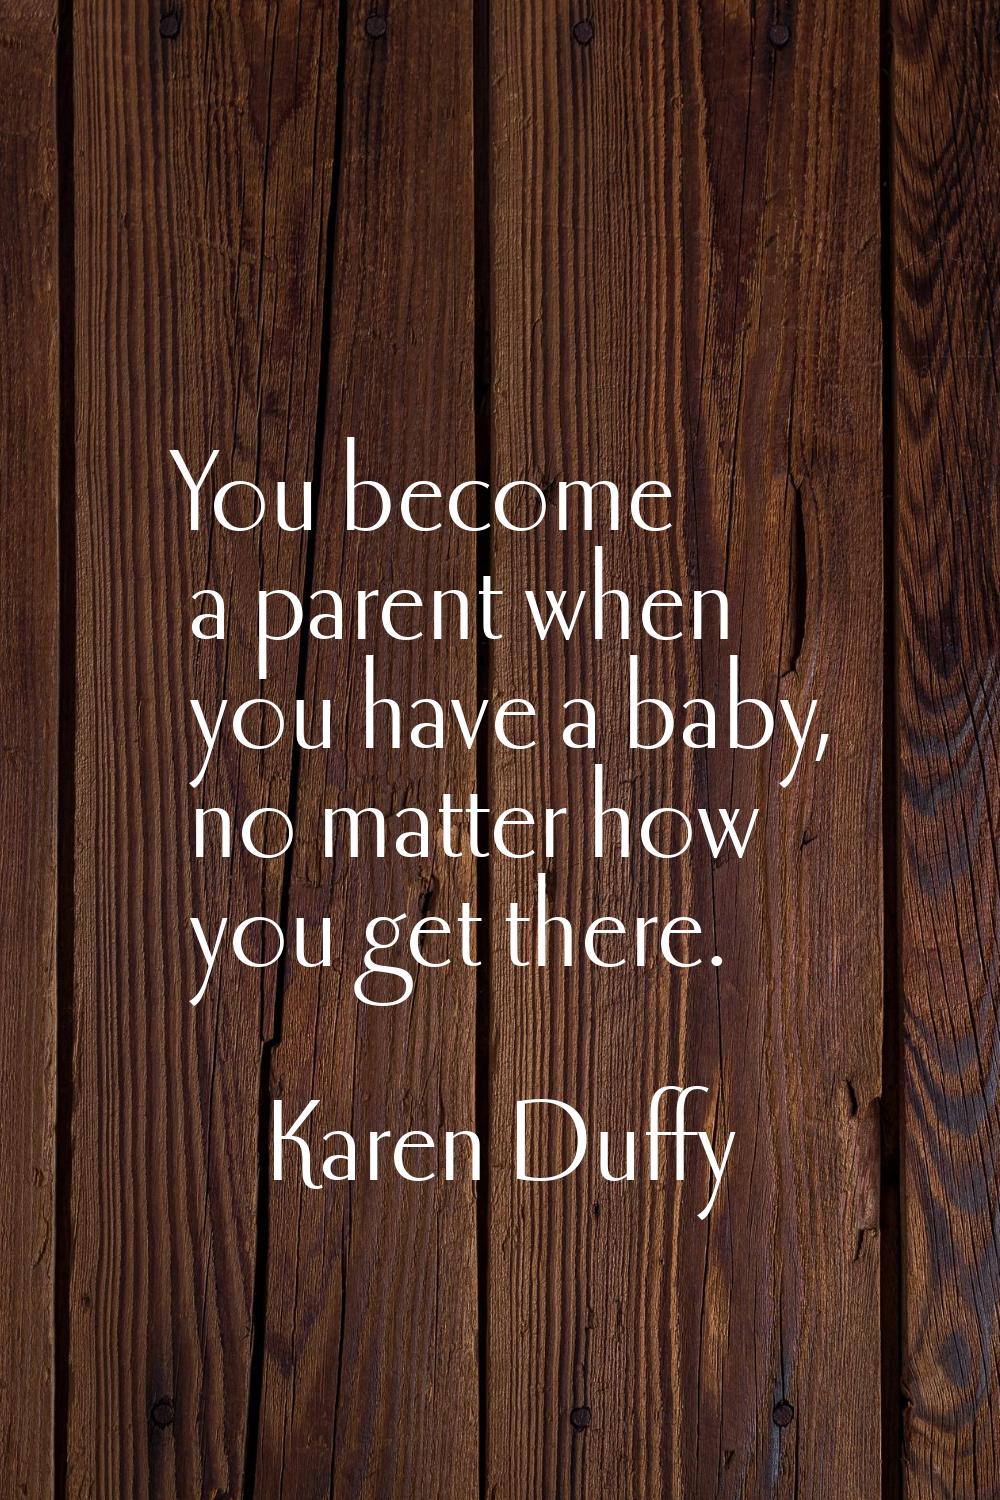 You become a parent when you have a baby, no matter how you get there.